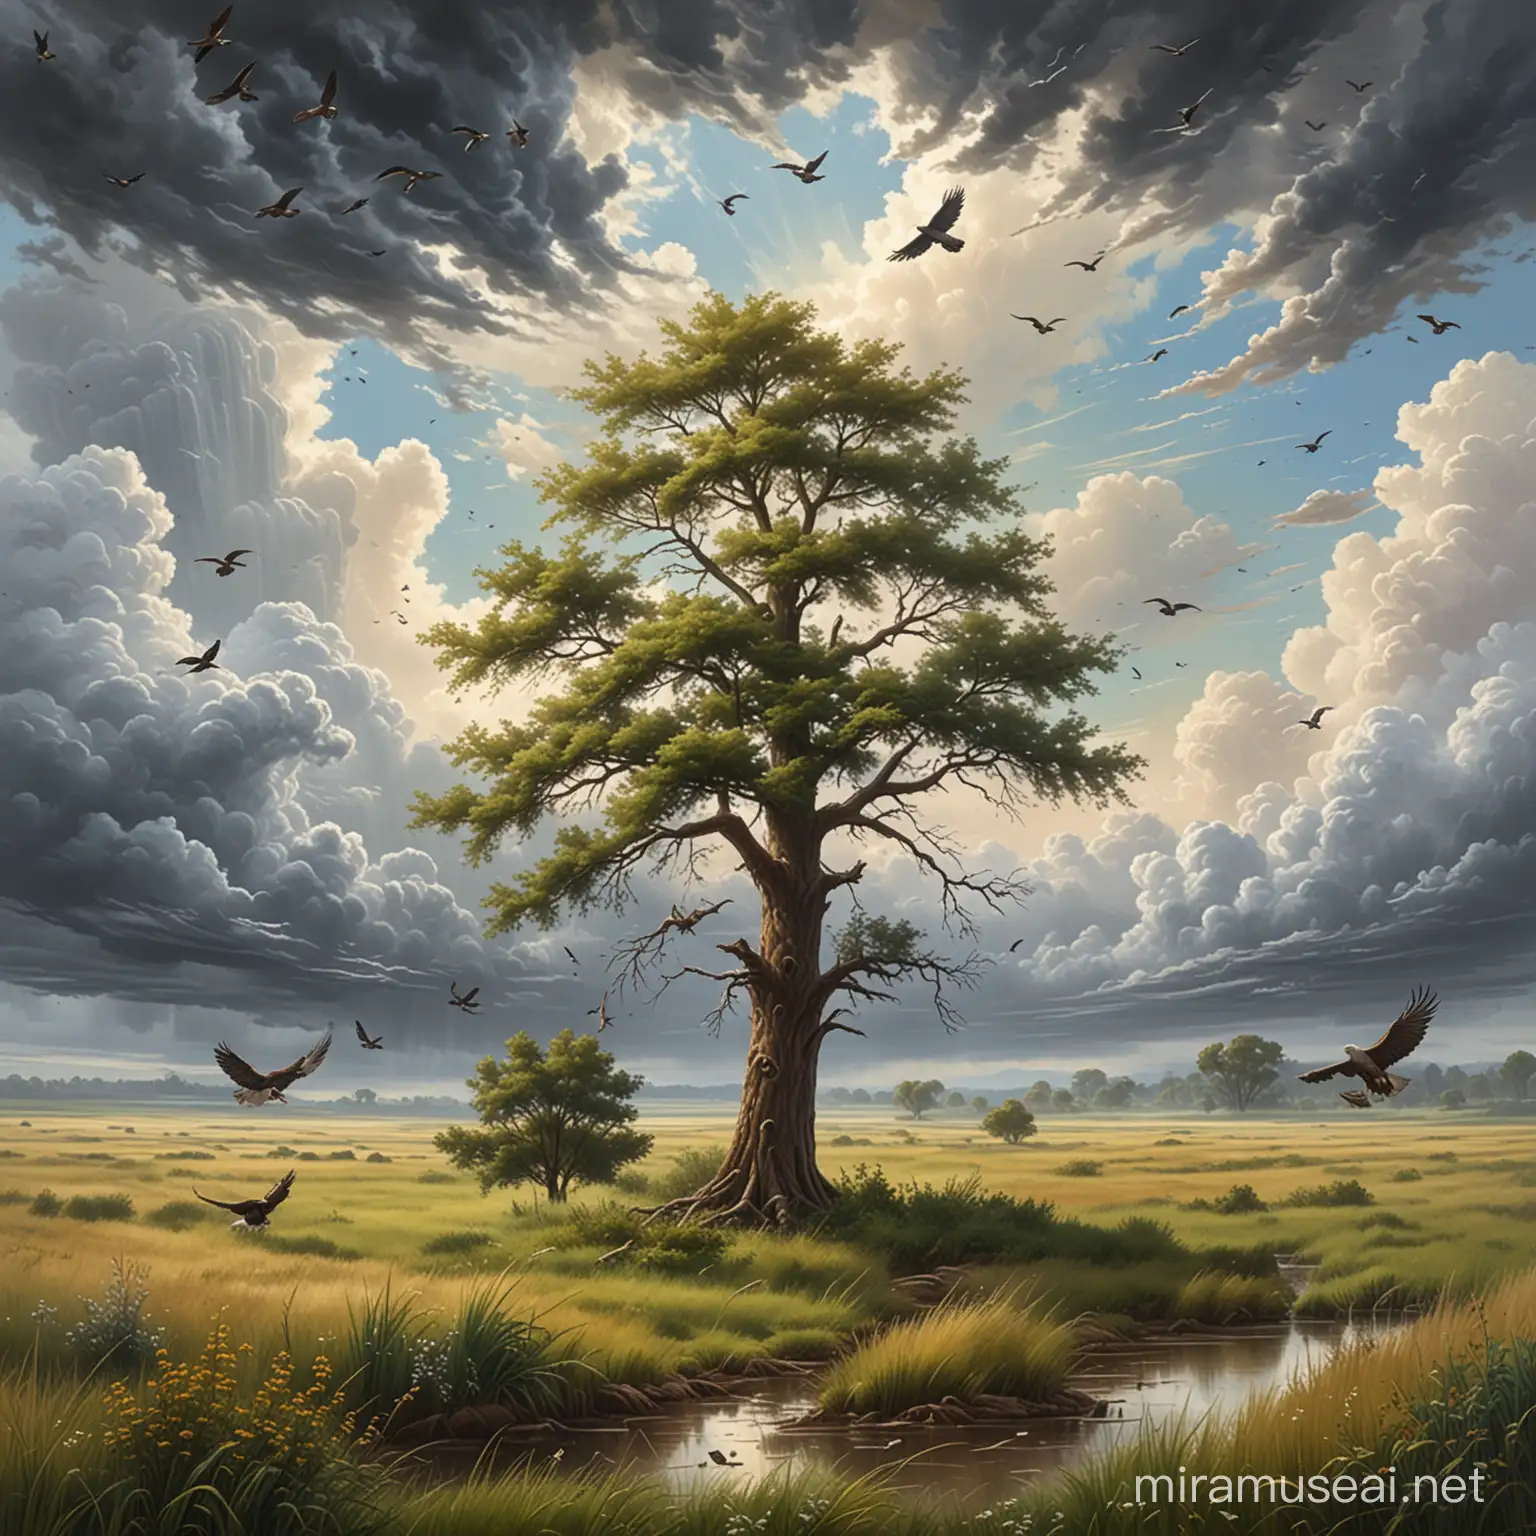 Majestic Giant Eagles Soaring Over a Cloudy Sky with Tree in Field